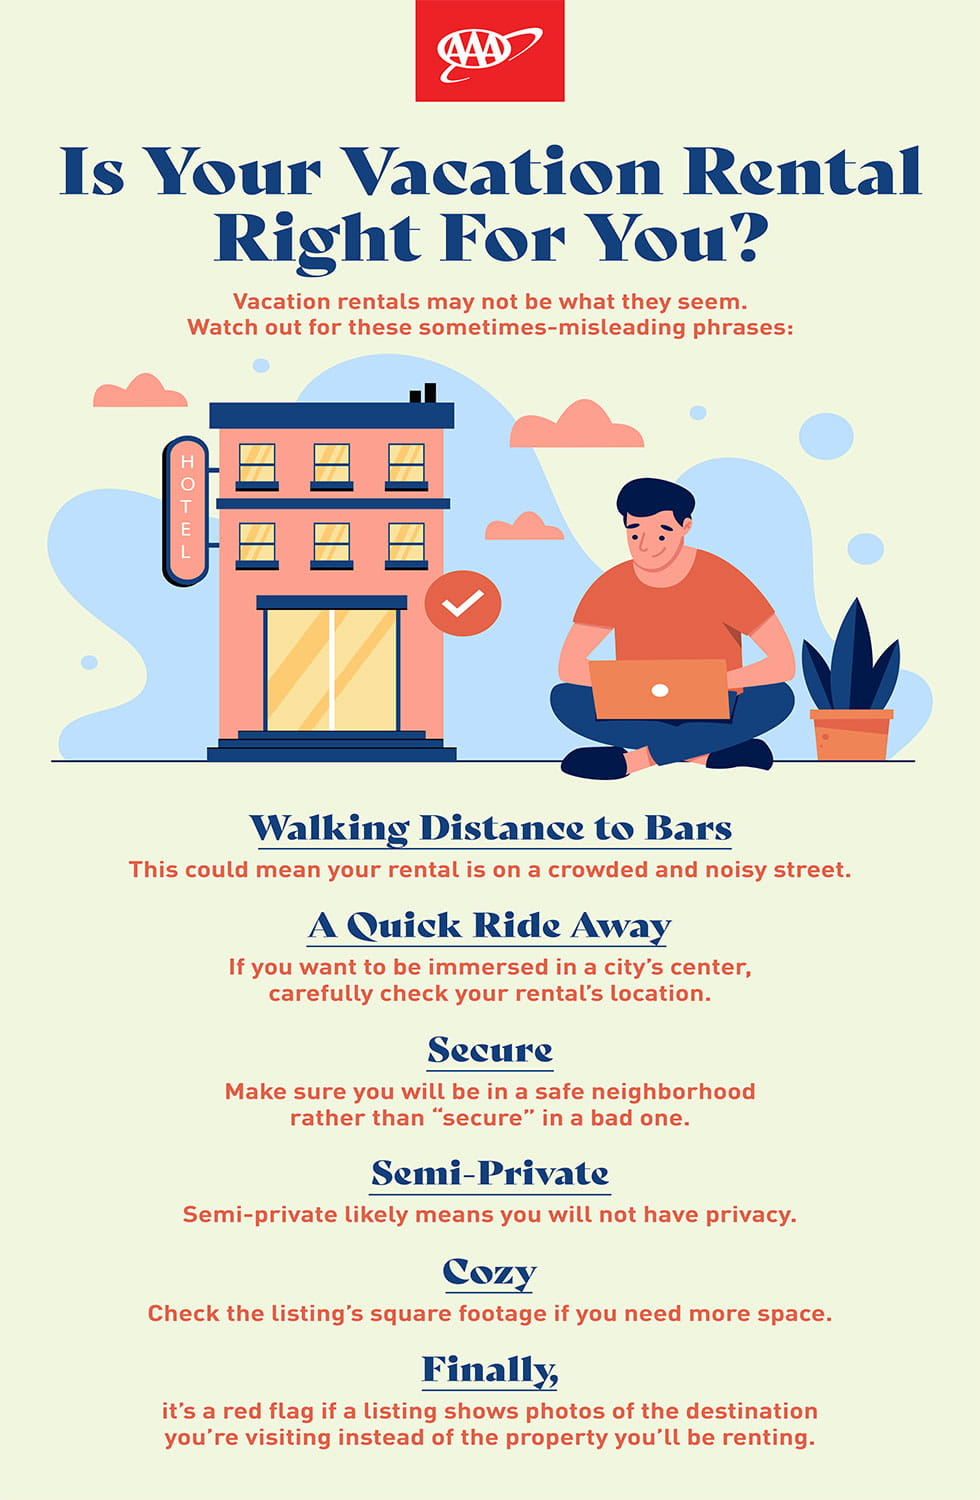 AAA infographic on choosing the right vacation rental